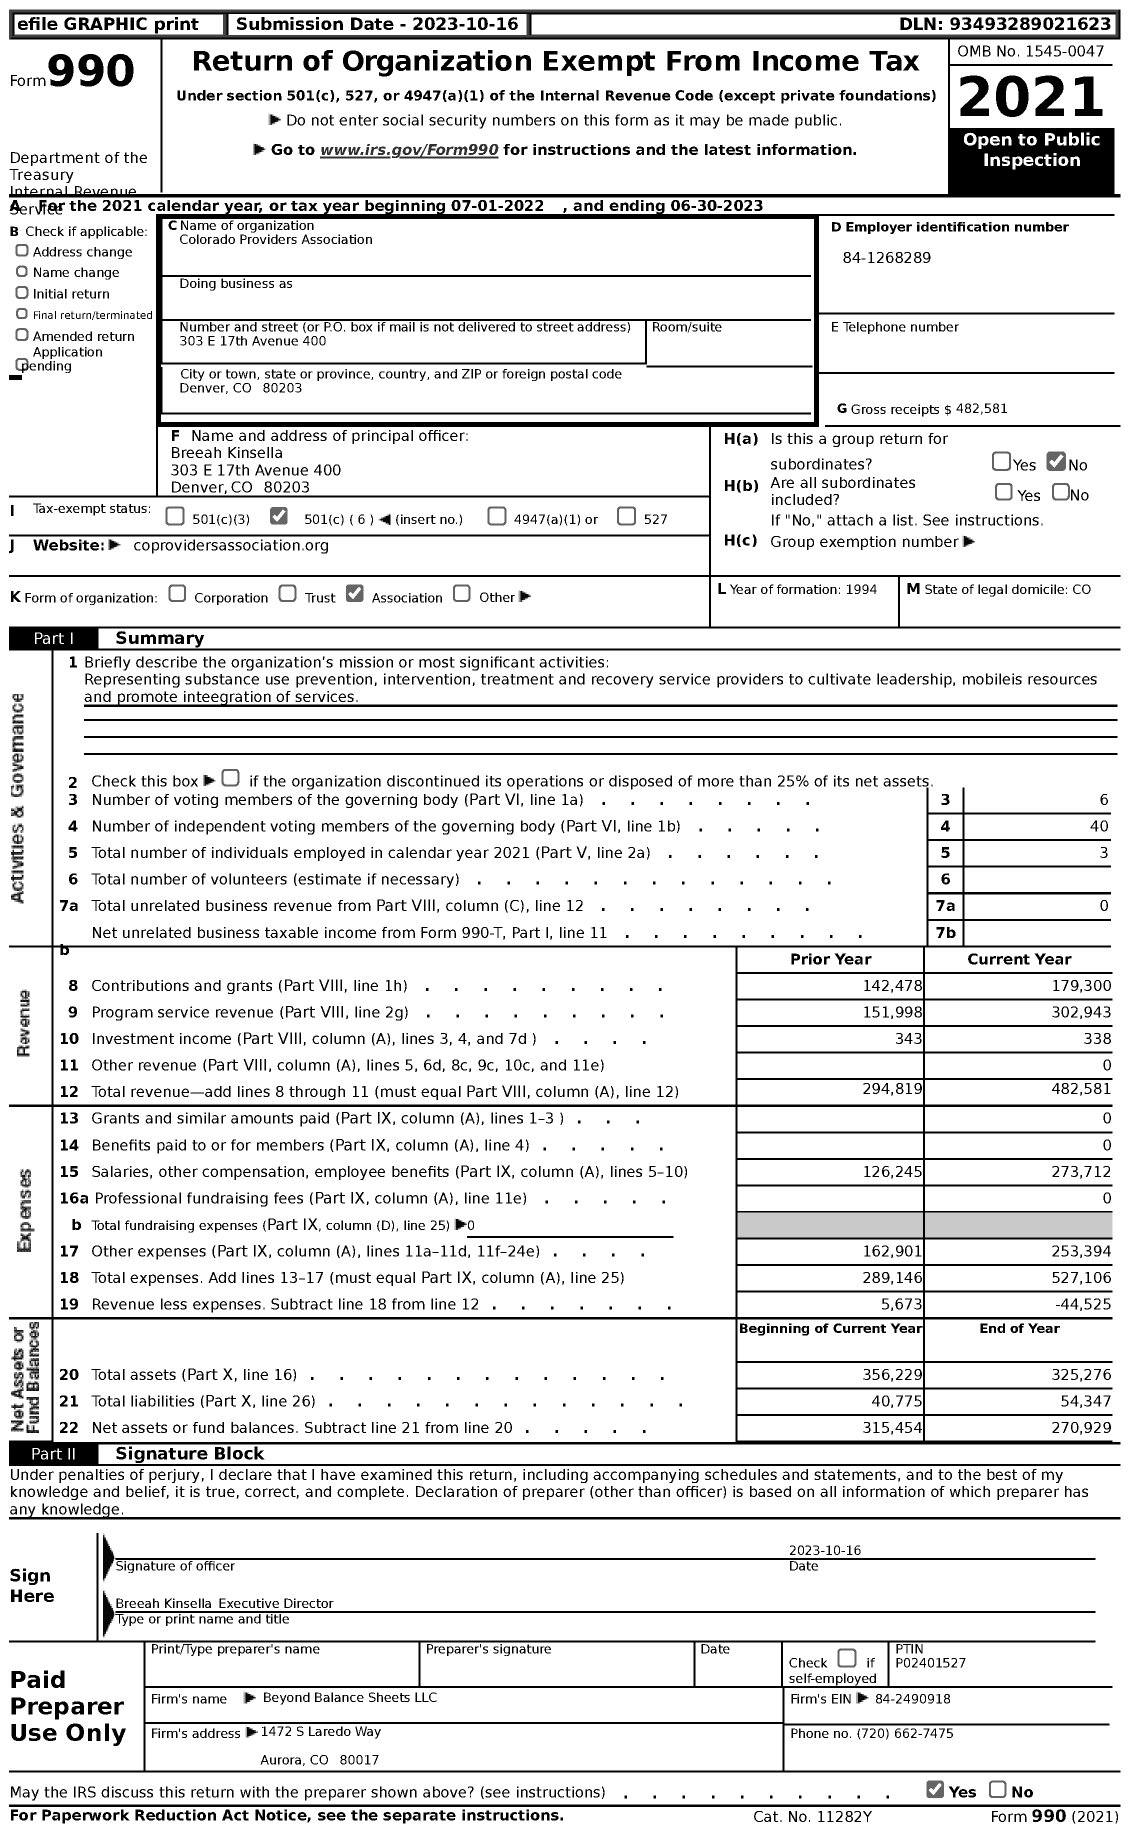 Image of first page of 2022 Form 990 for Colorado Providers Association